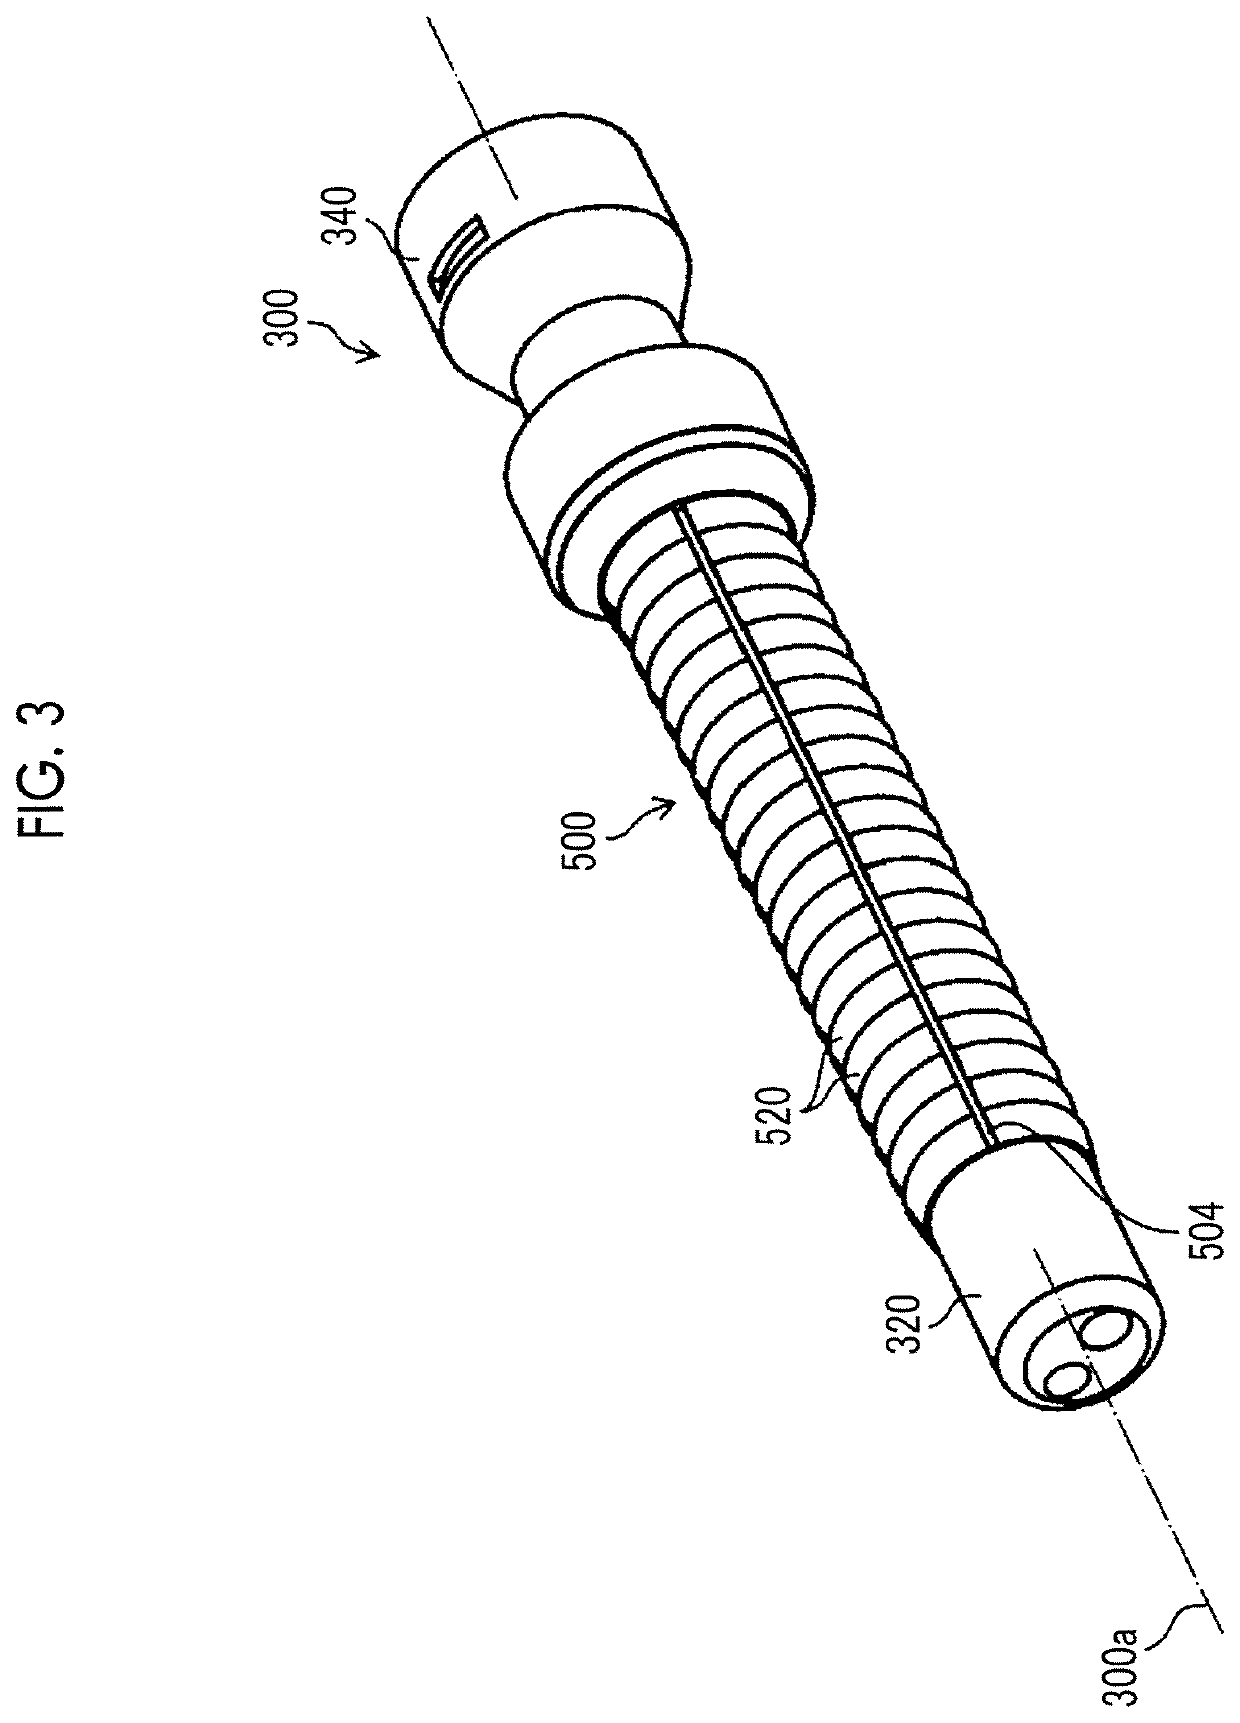 Surgical apparatus for endoscope